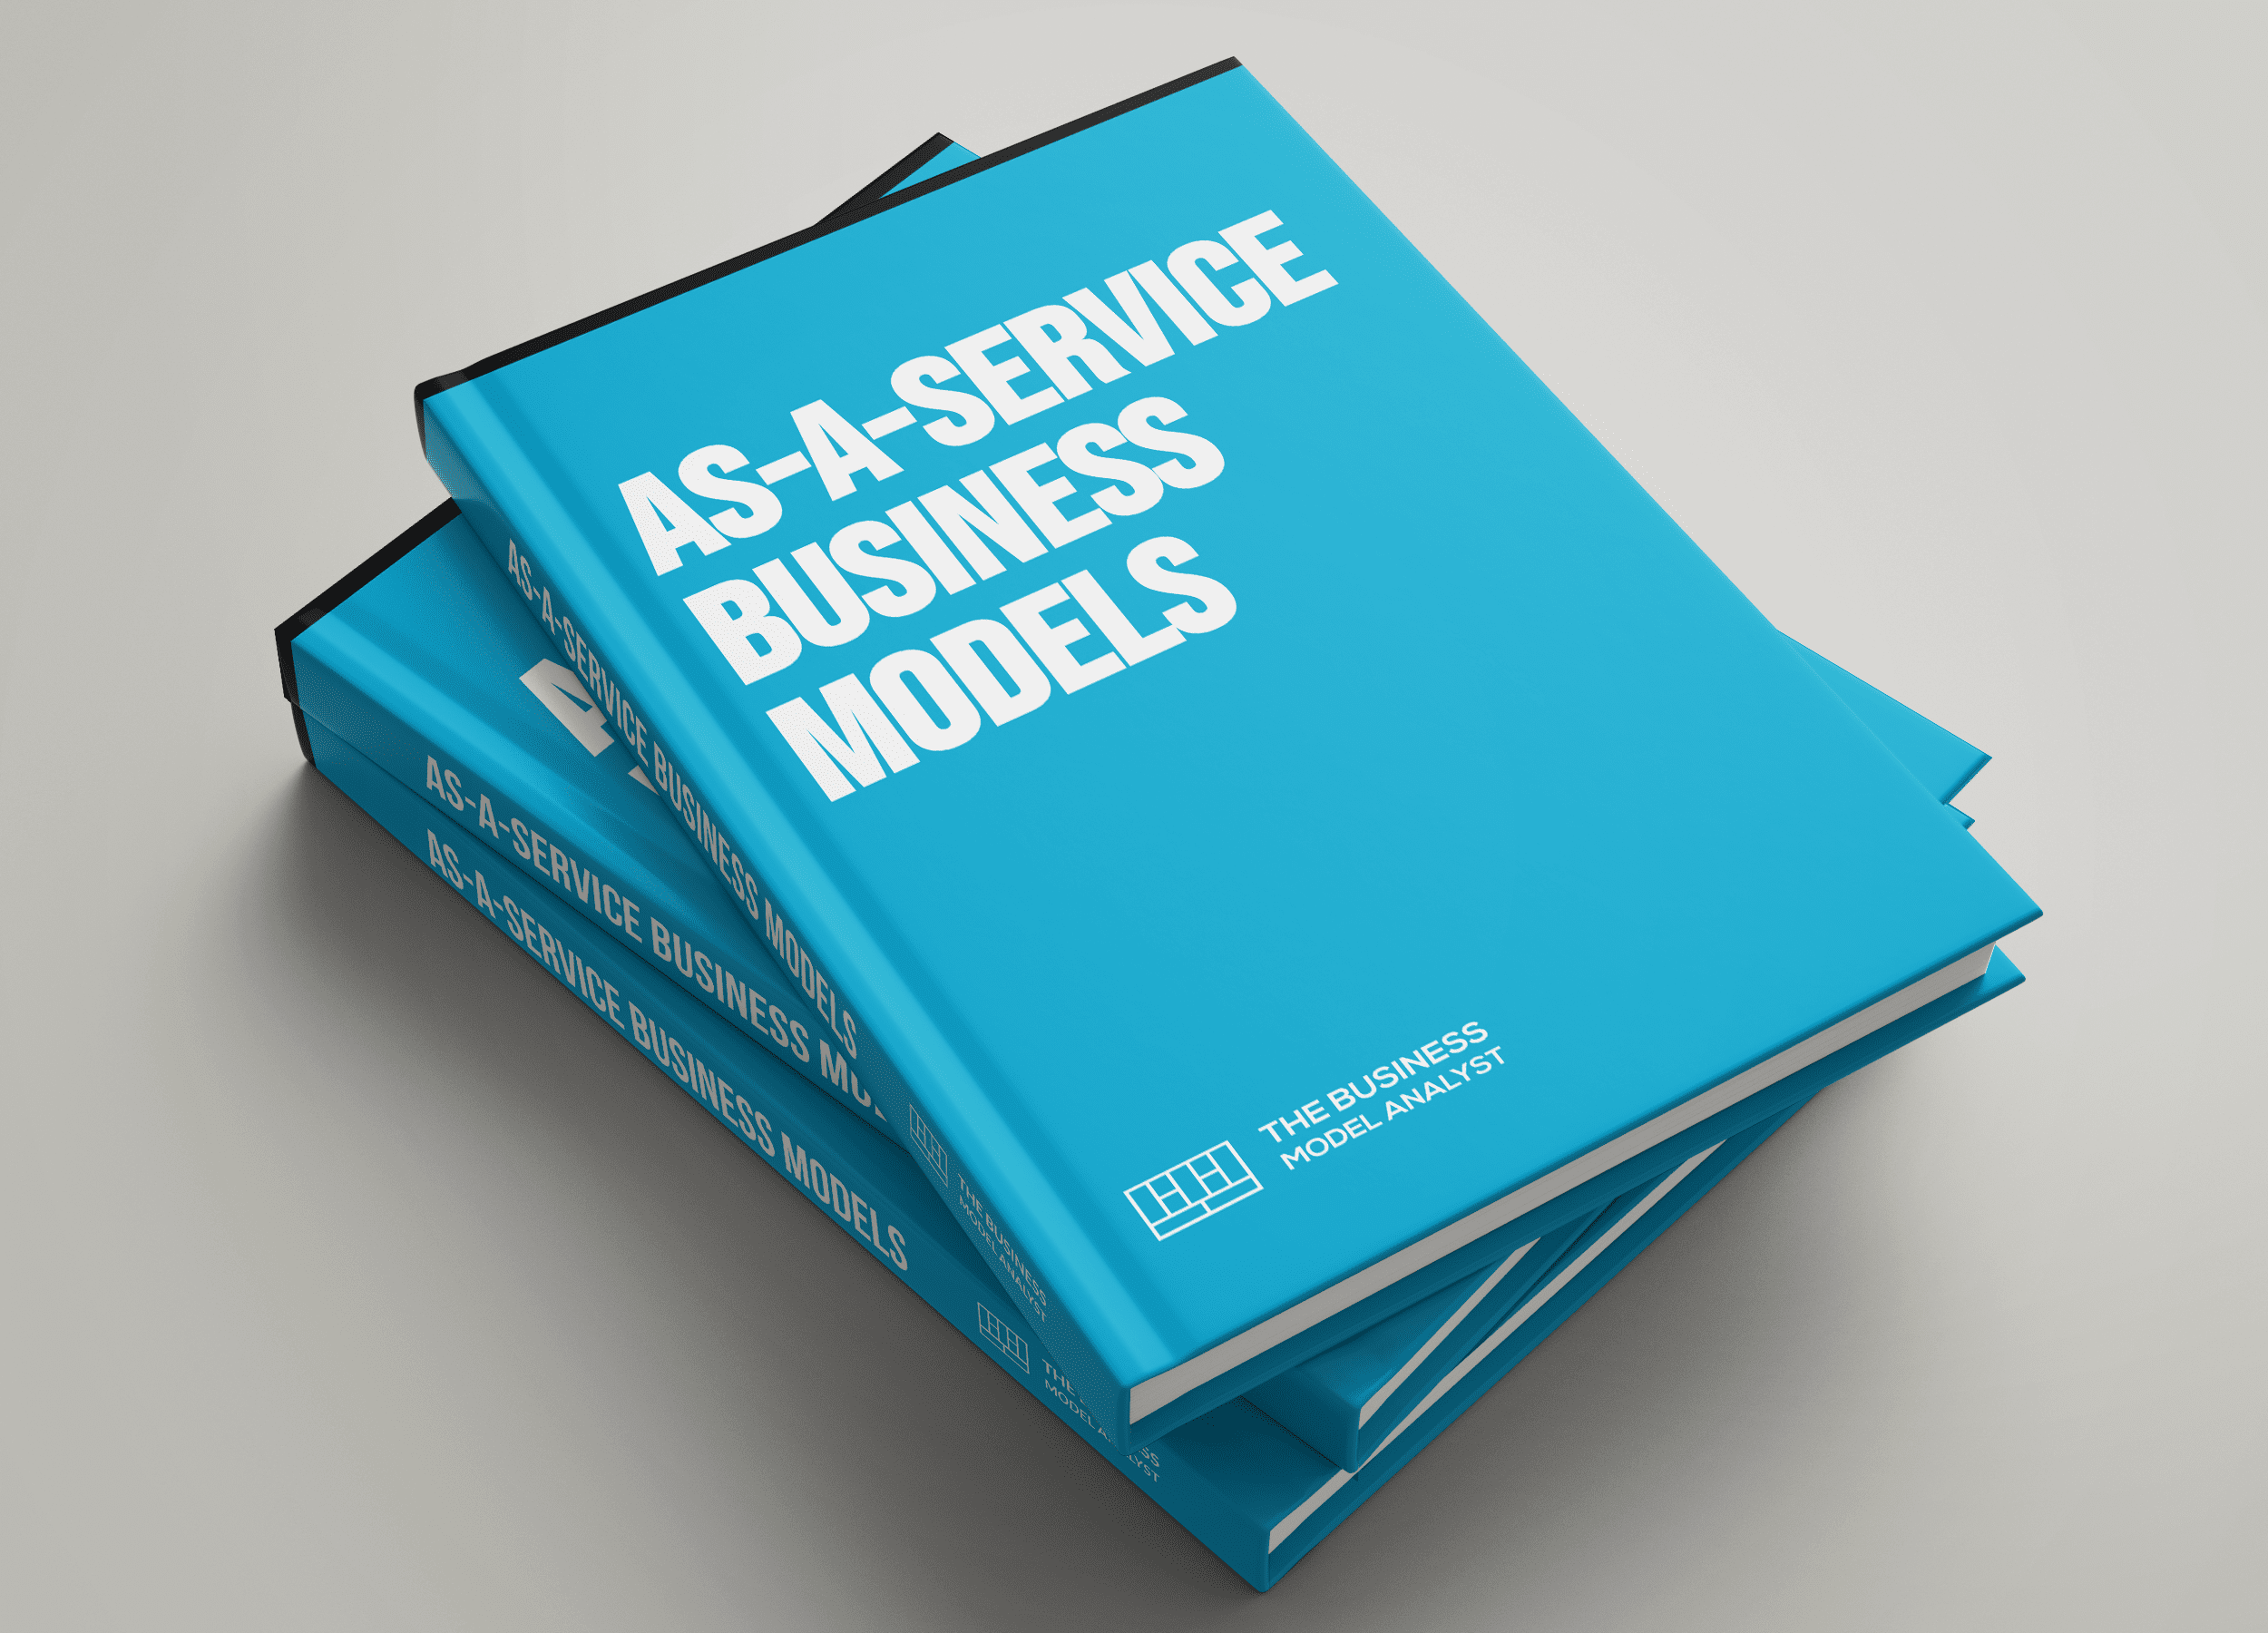 Business model covers as a service